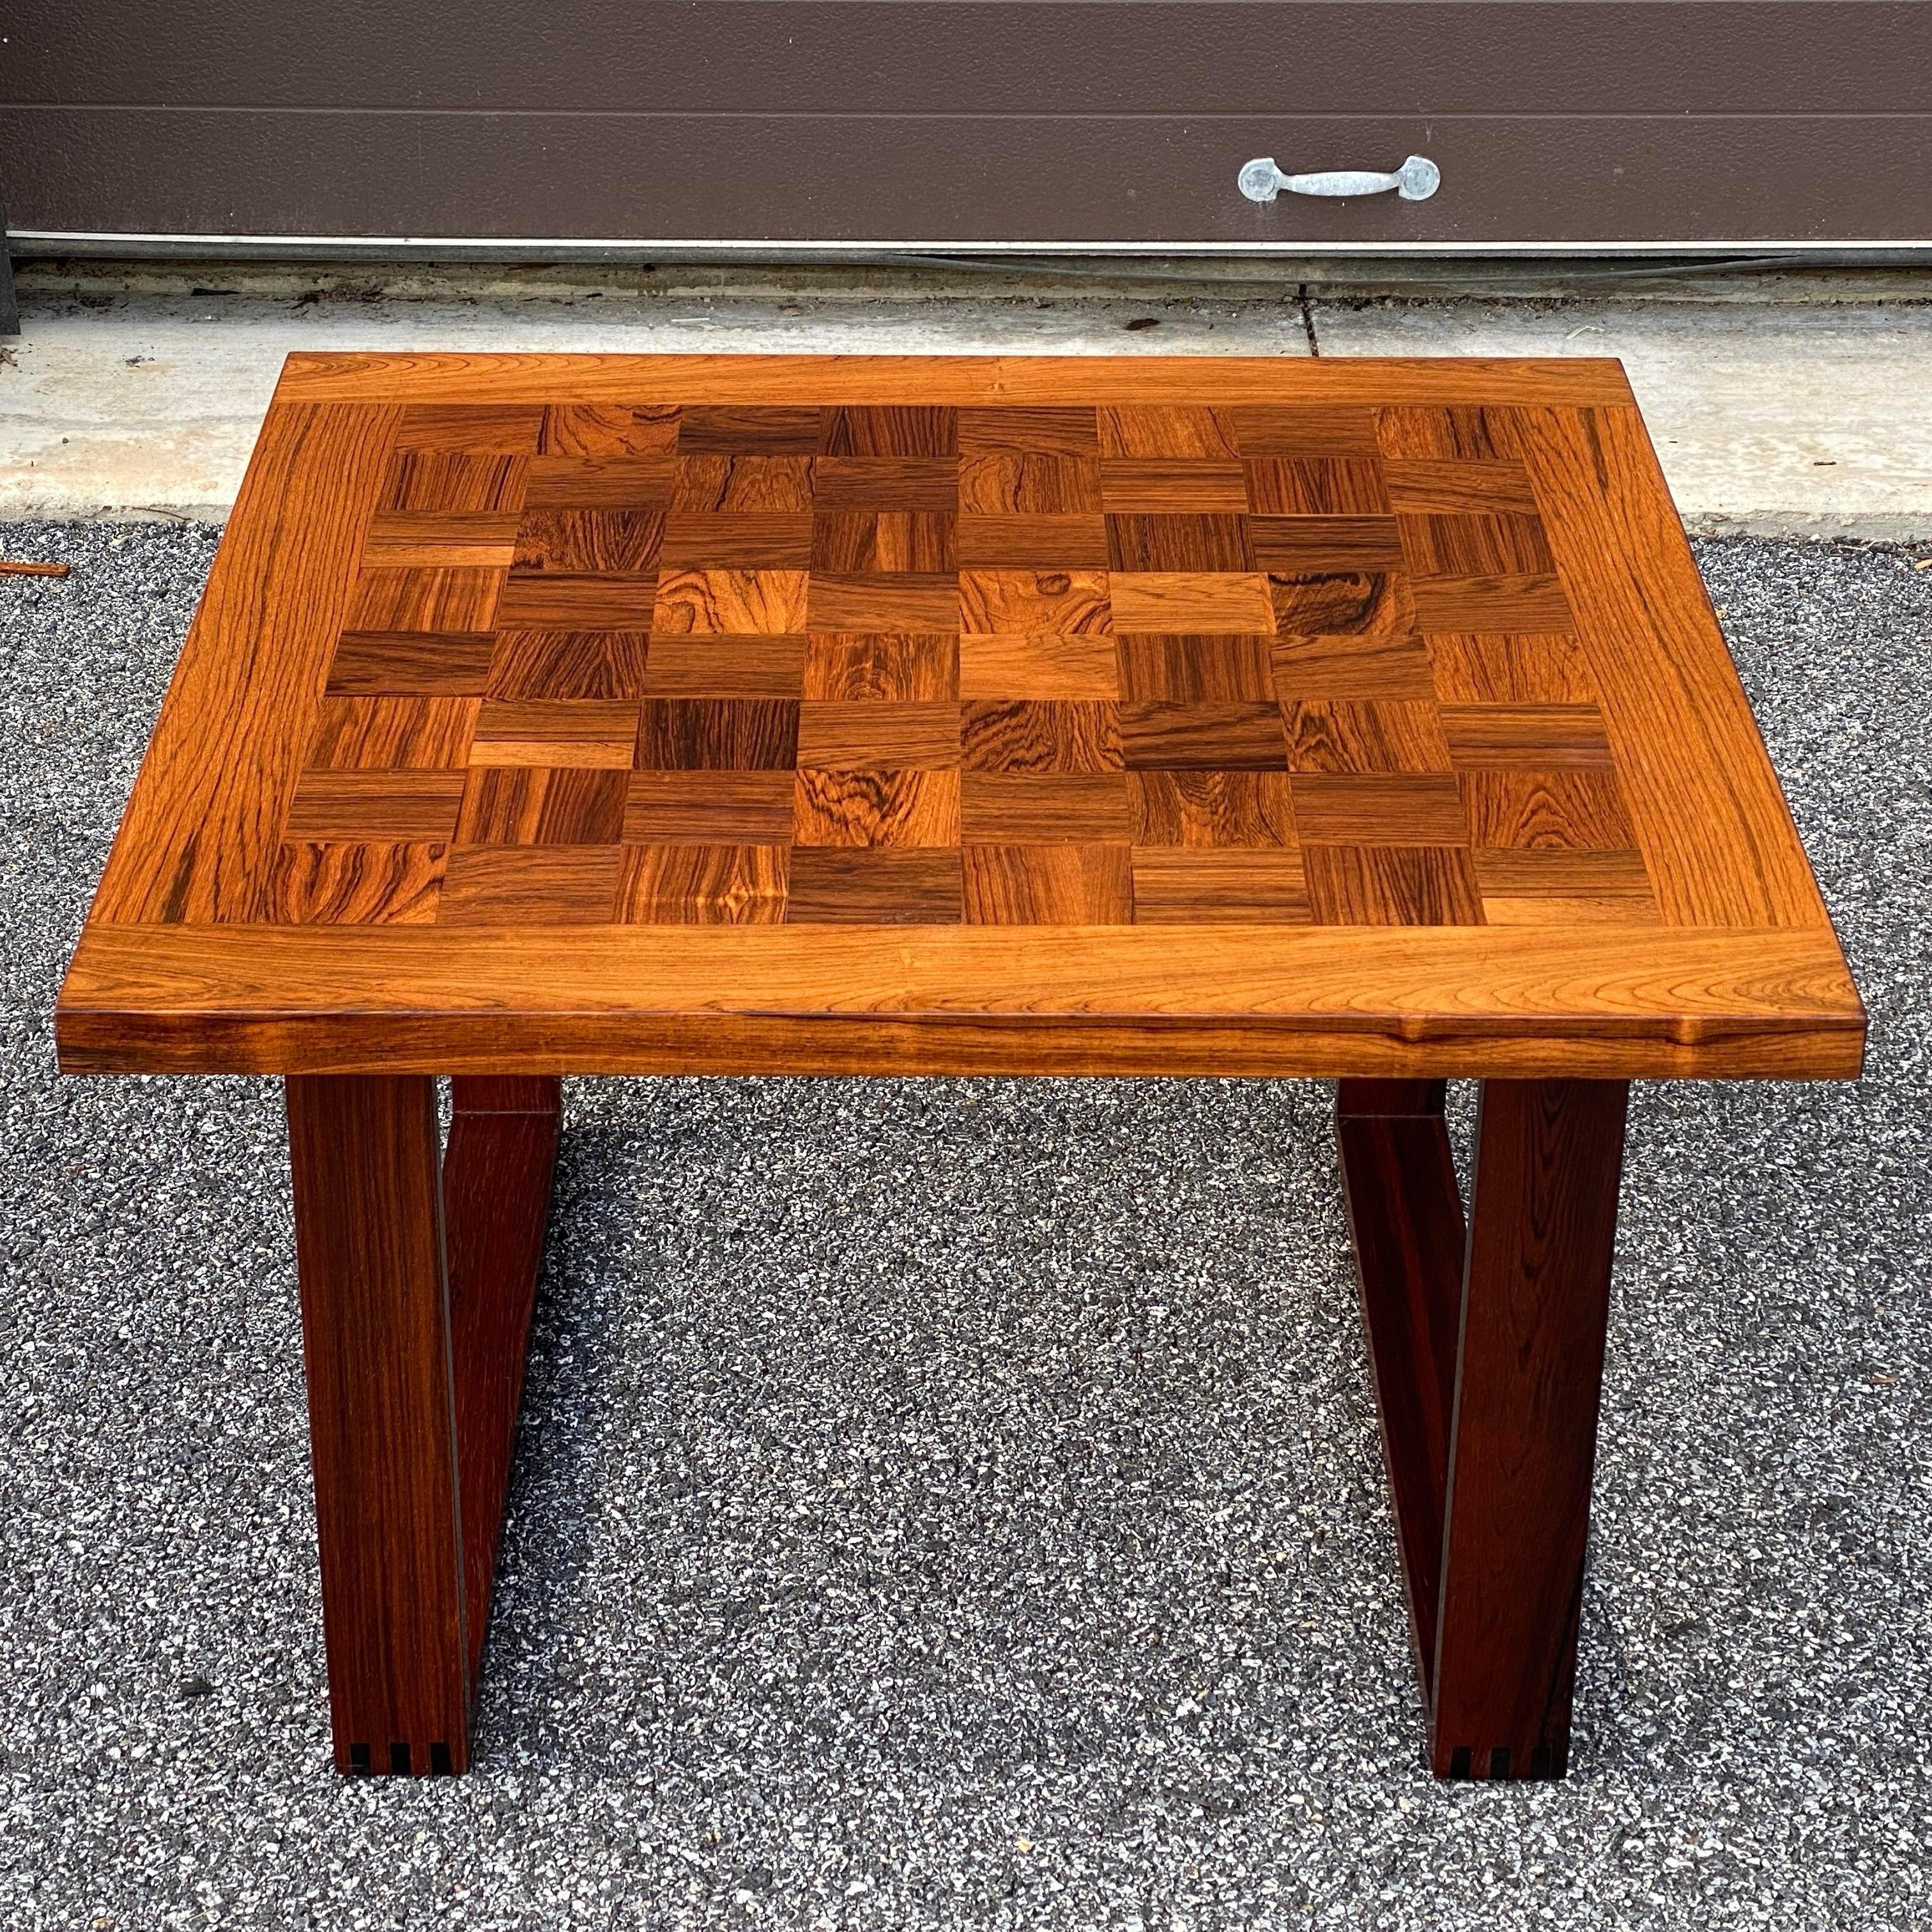 Vintage rosewood coffee table with a chessboard style top designed by Poul Cadovius for France & Son. Marked underneath with 